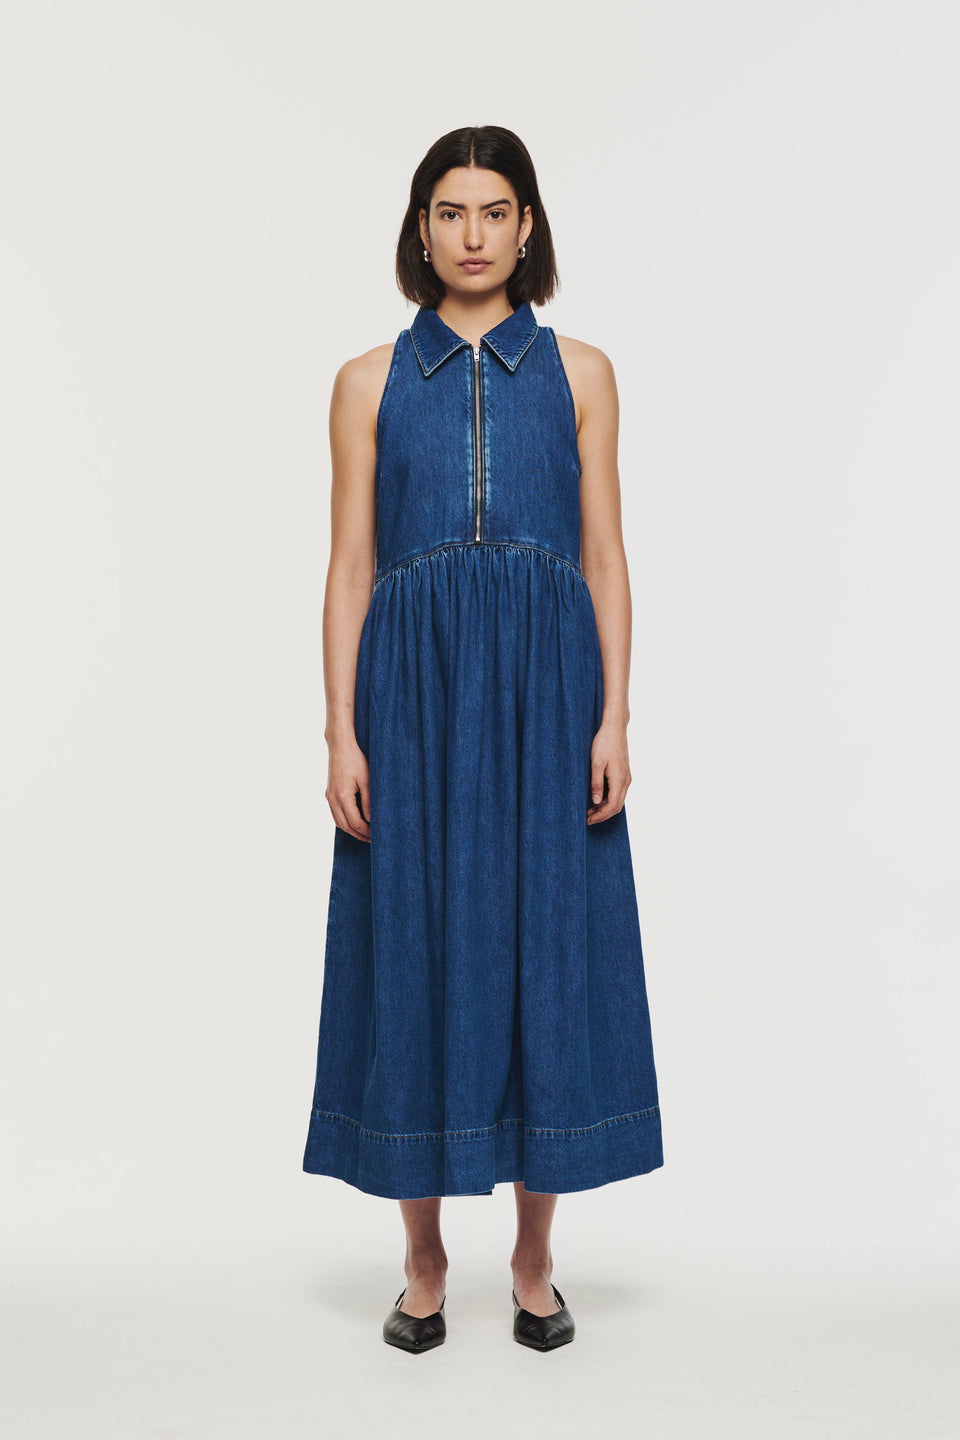 Introducing Gabi, a sleeveless version of our bestselling Gabriella dress. Designed in a flattering shape, it has an empire waistline, zip collar and mid blue tone. An easy-to-wear denim midi dress, it looks great when paired with flats for an effortless everyday look.